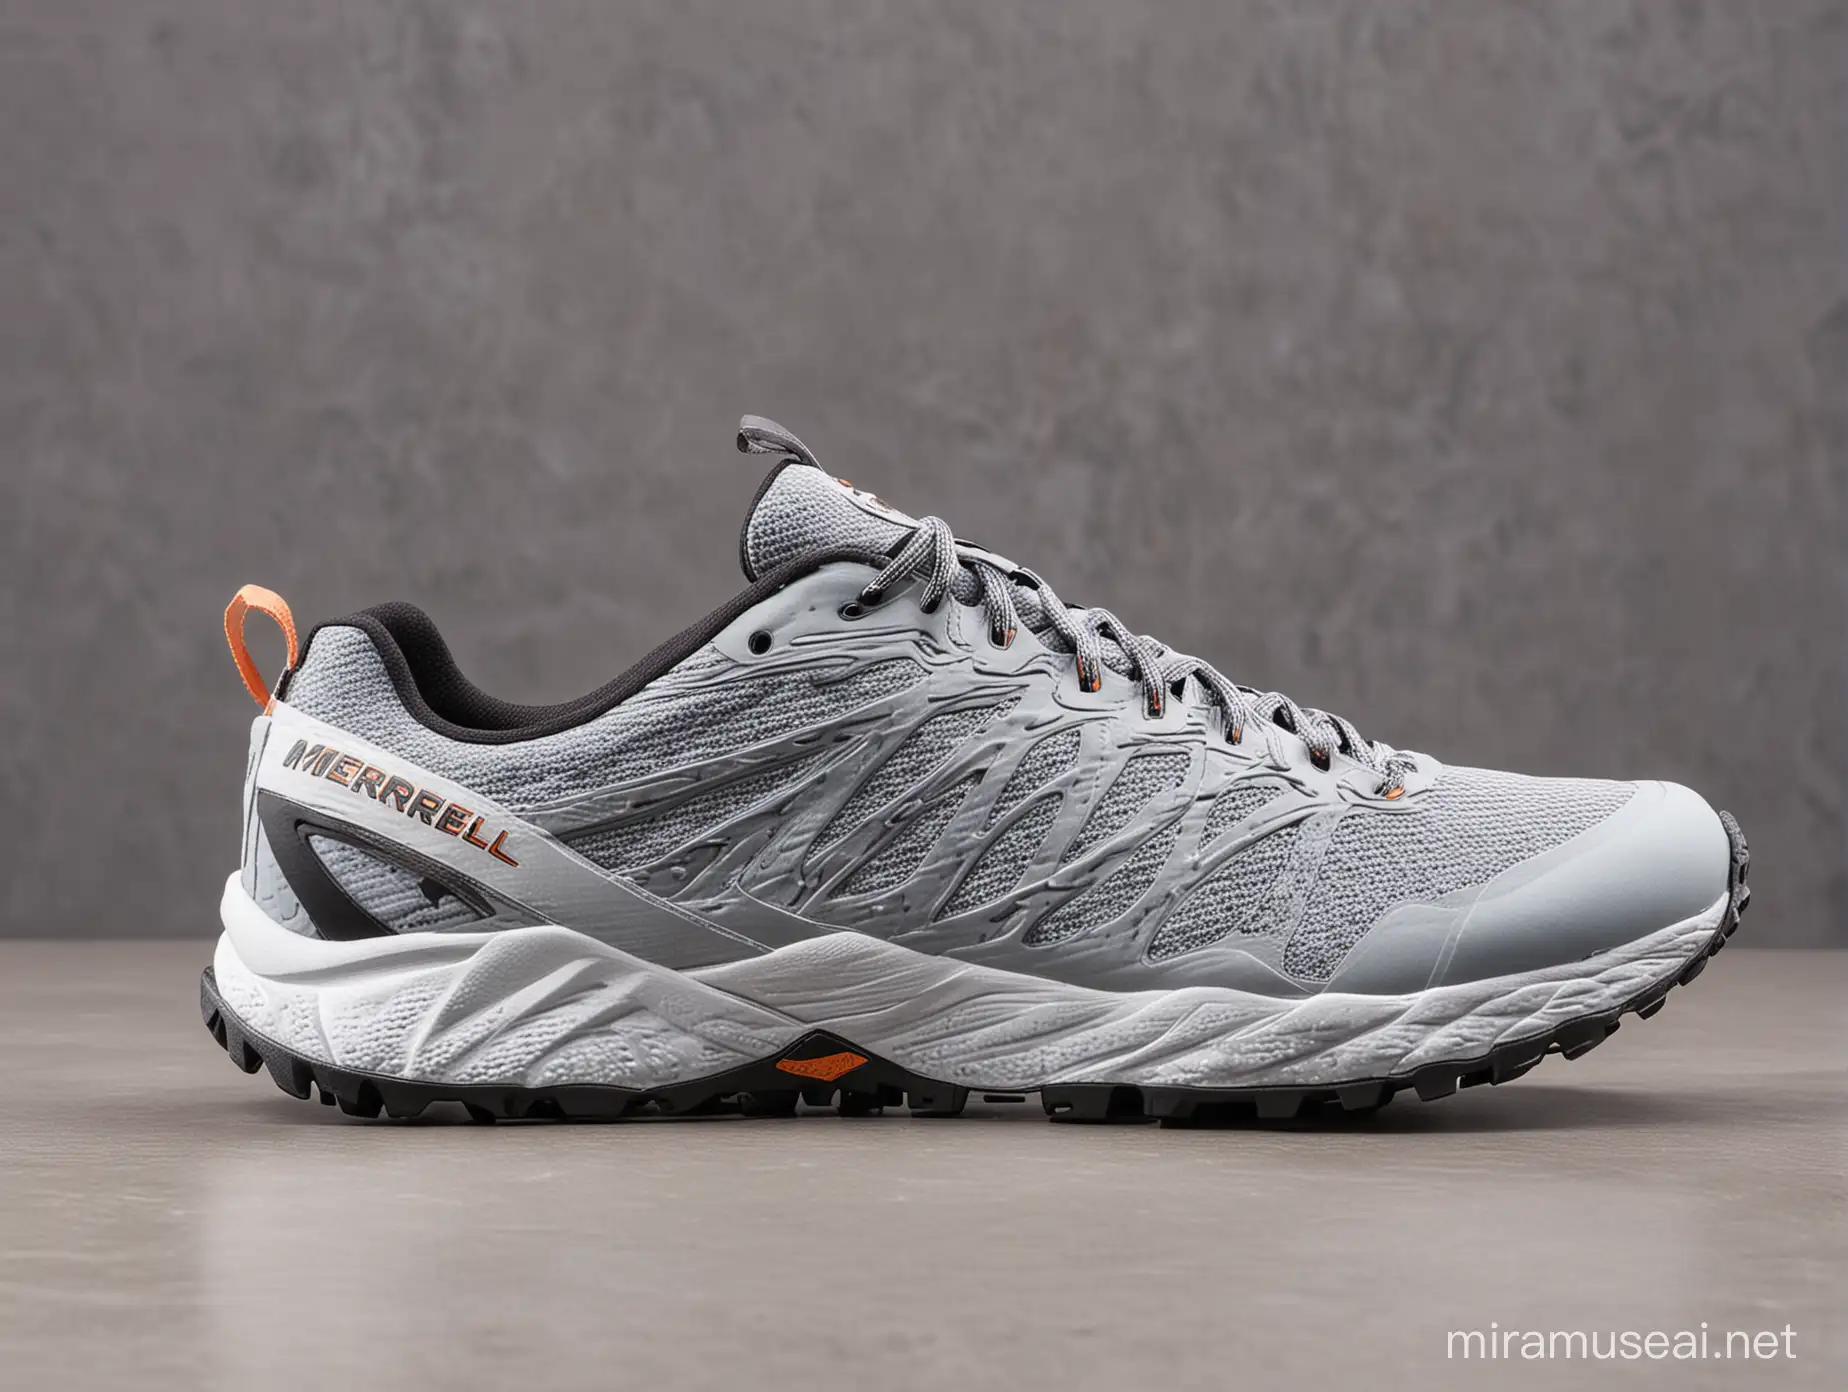 Merrell Agility Peak Flex 3 Running Shoes and the background is light grey